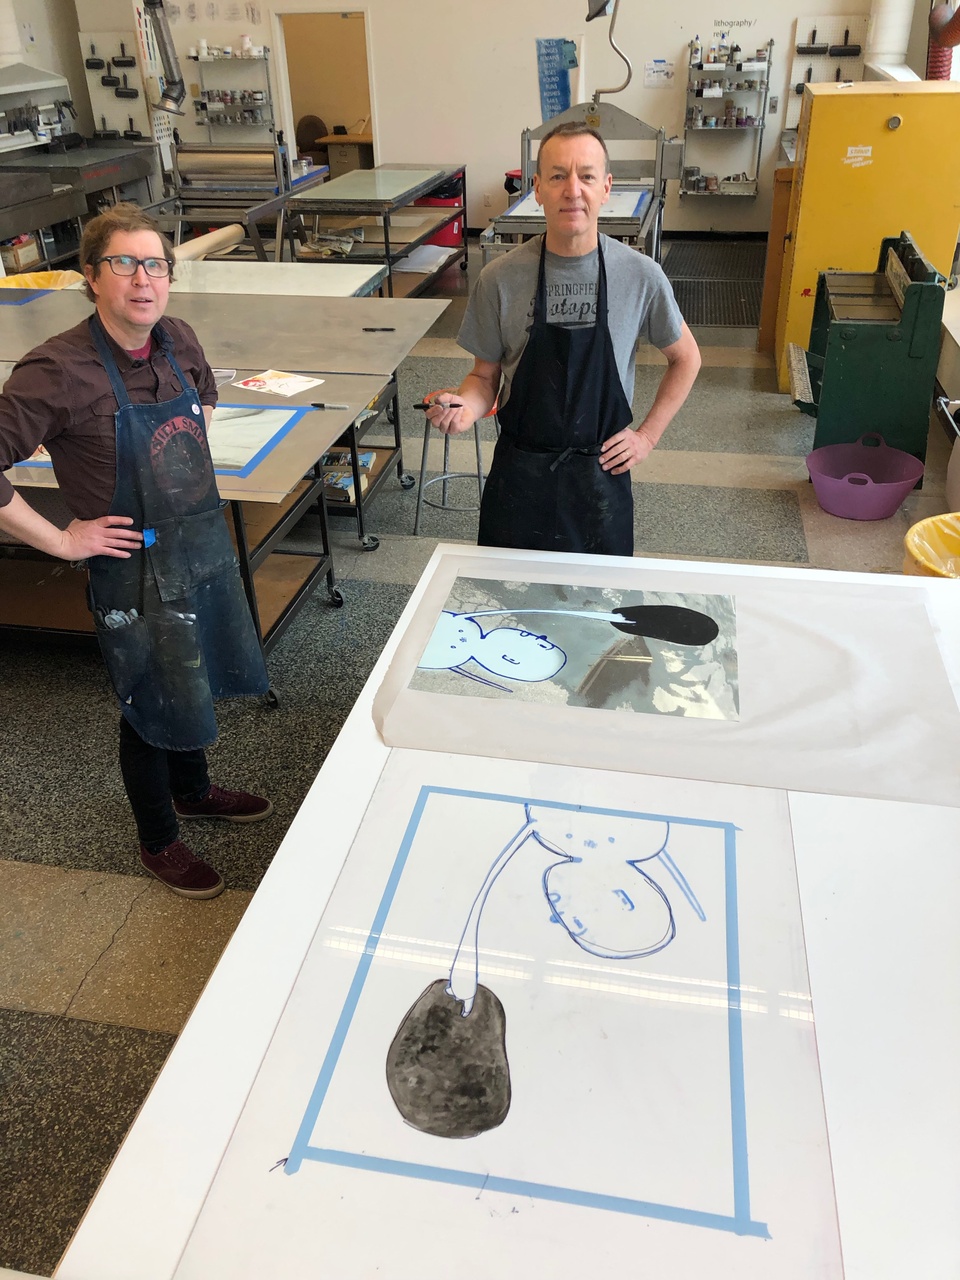 Tom Reed and David Humphrey pose for a photo in front of a table with two large images prepped for print in the printing studio.  